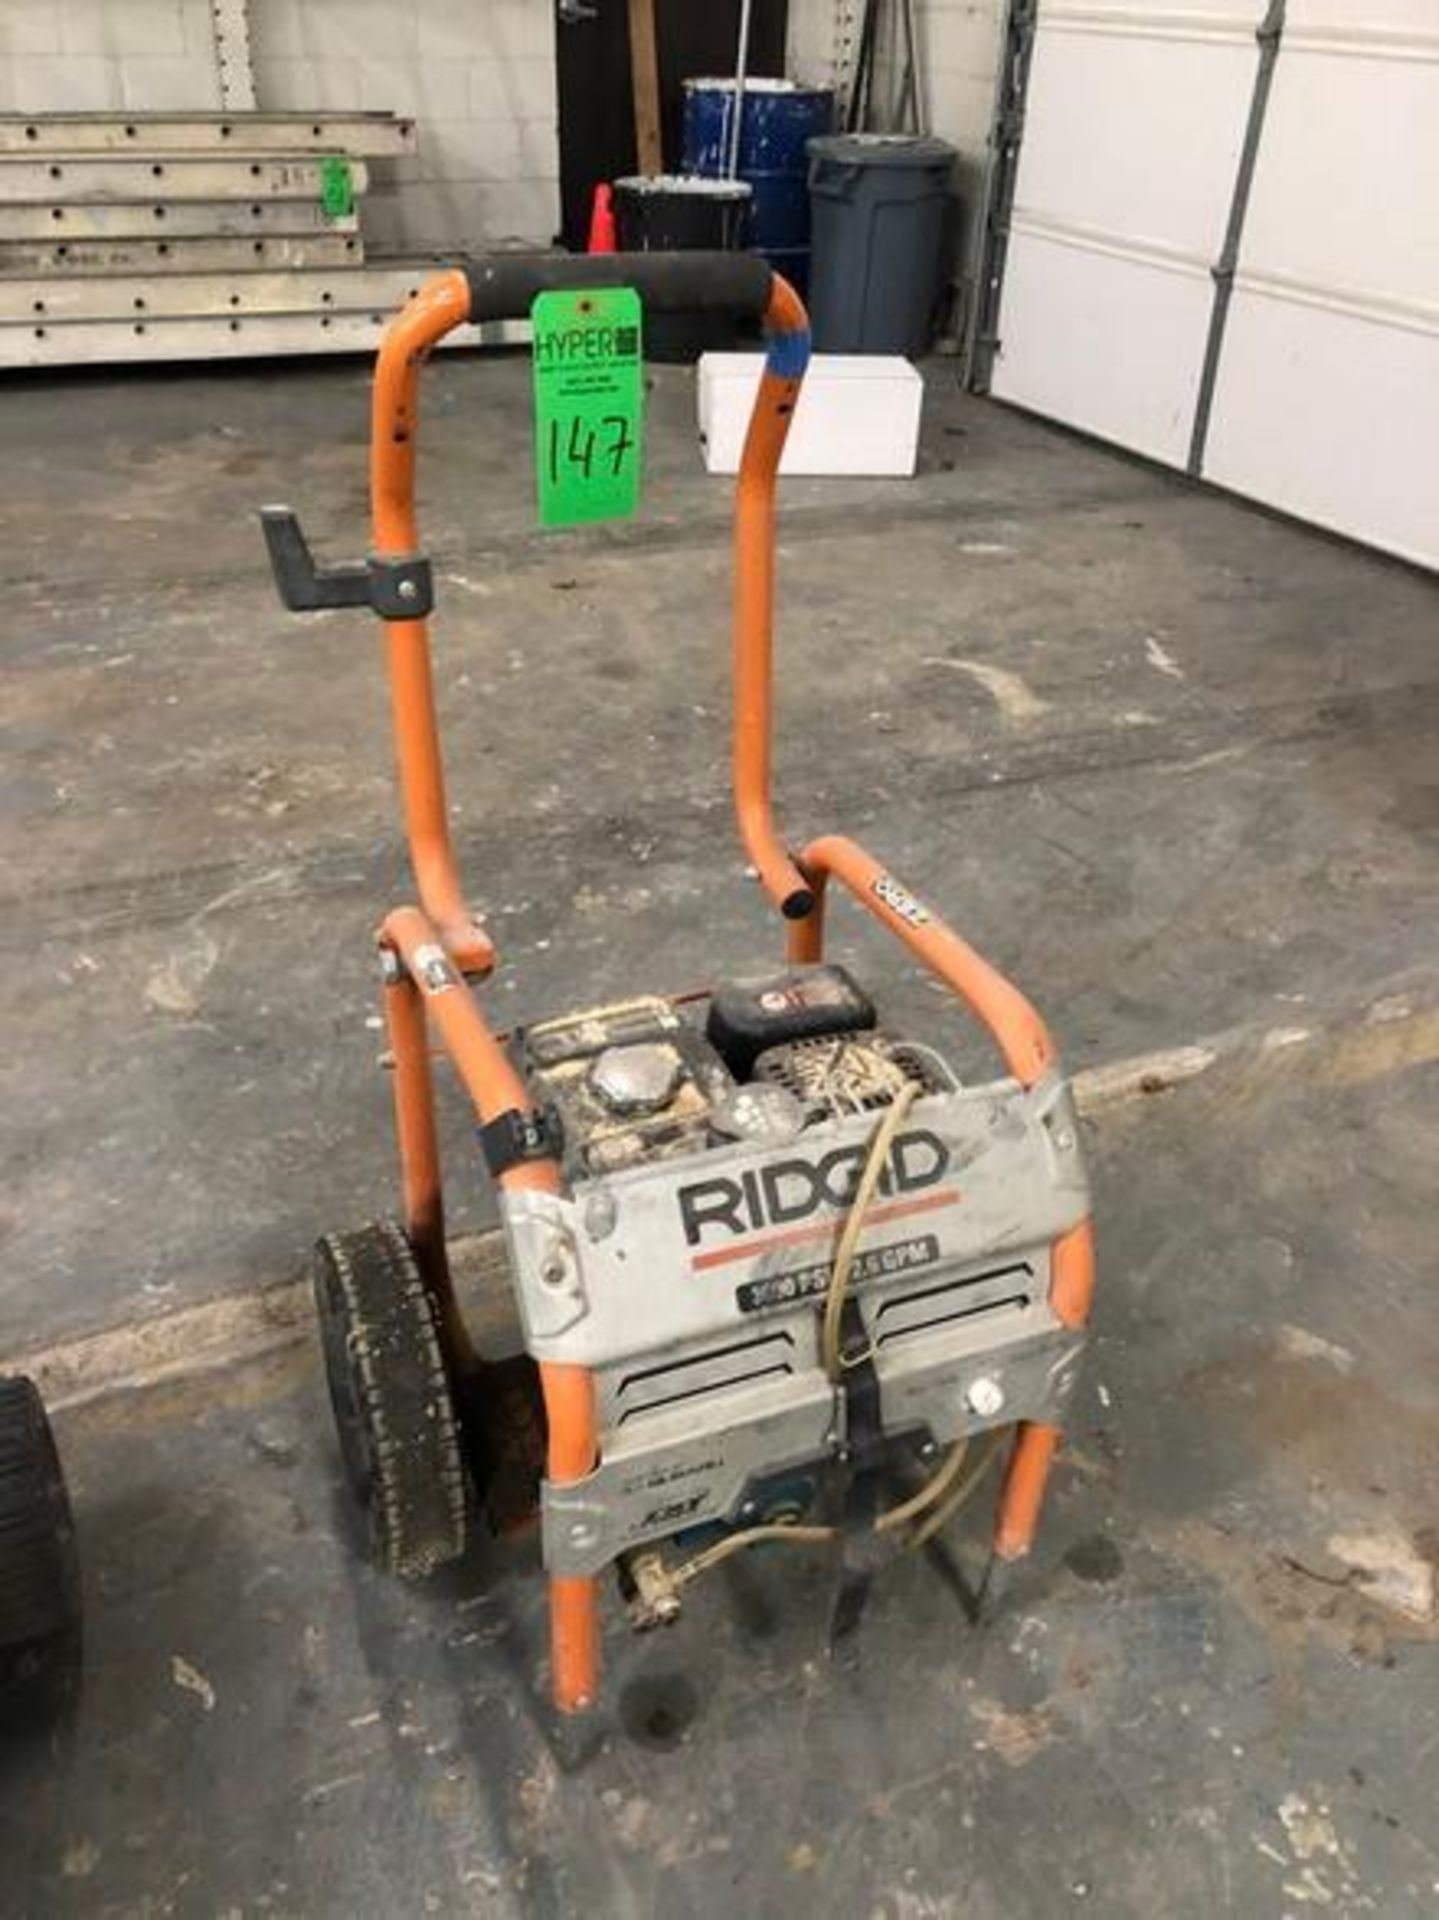 Ridged 3,000 PSI 2.6 GPM Portable Gas Powered Pressure Washer